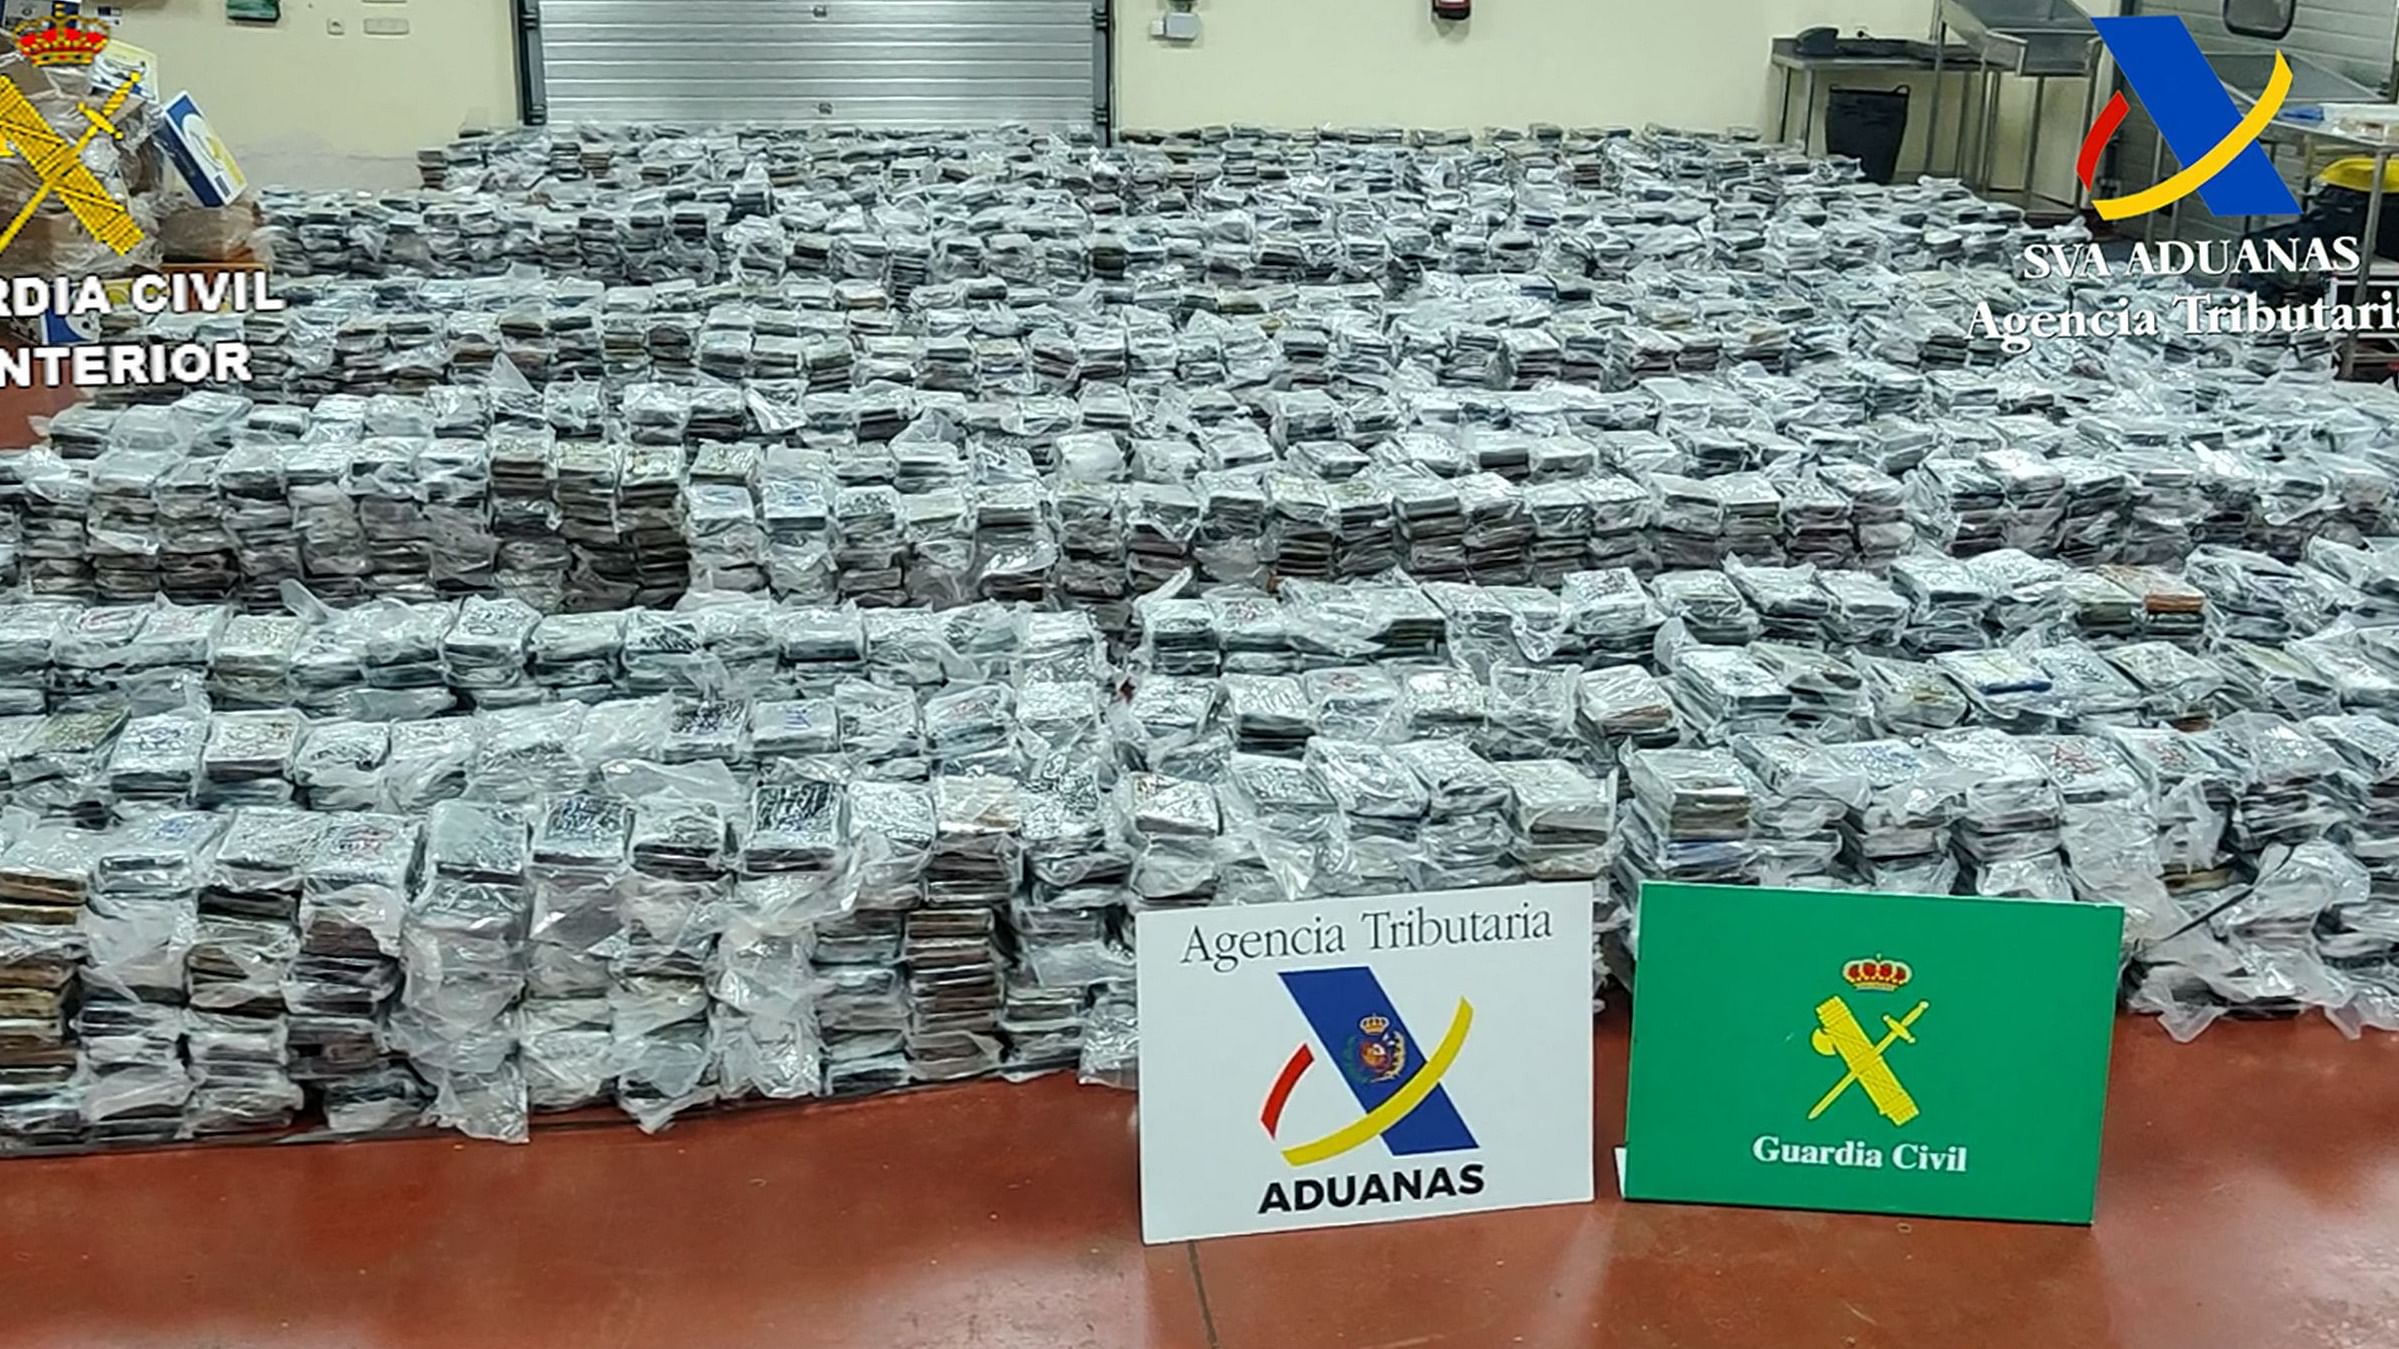 A photo shared by the ministry showed a pile of plastic-wrapped bricks of what it said was cocaine with the word "rey" ("king"), written in bold letters on them. Credit: AFP Photo / GUARDIA CIVIL